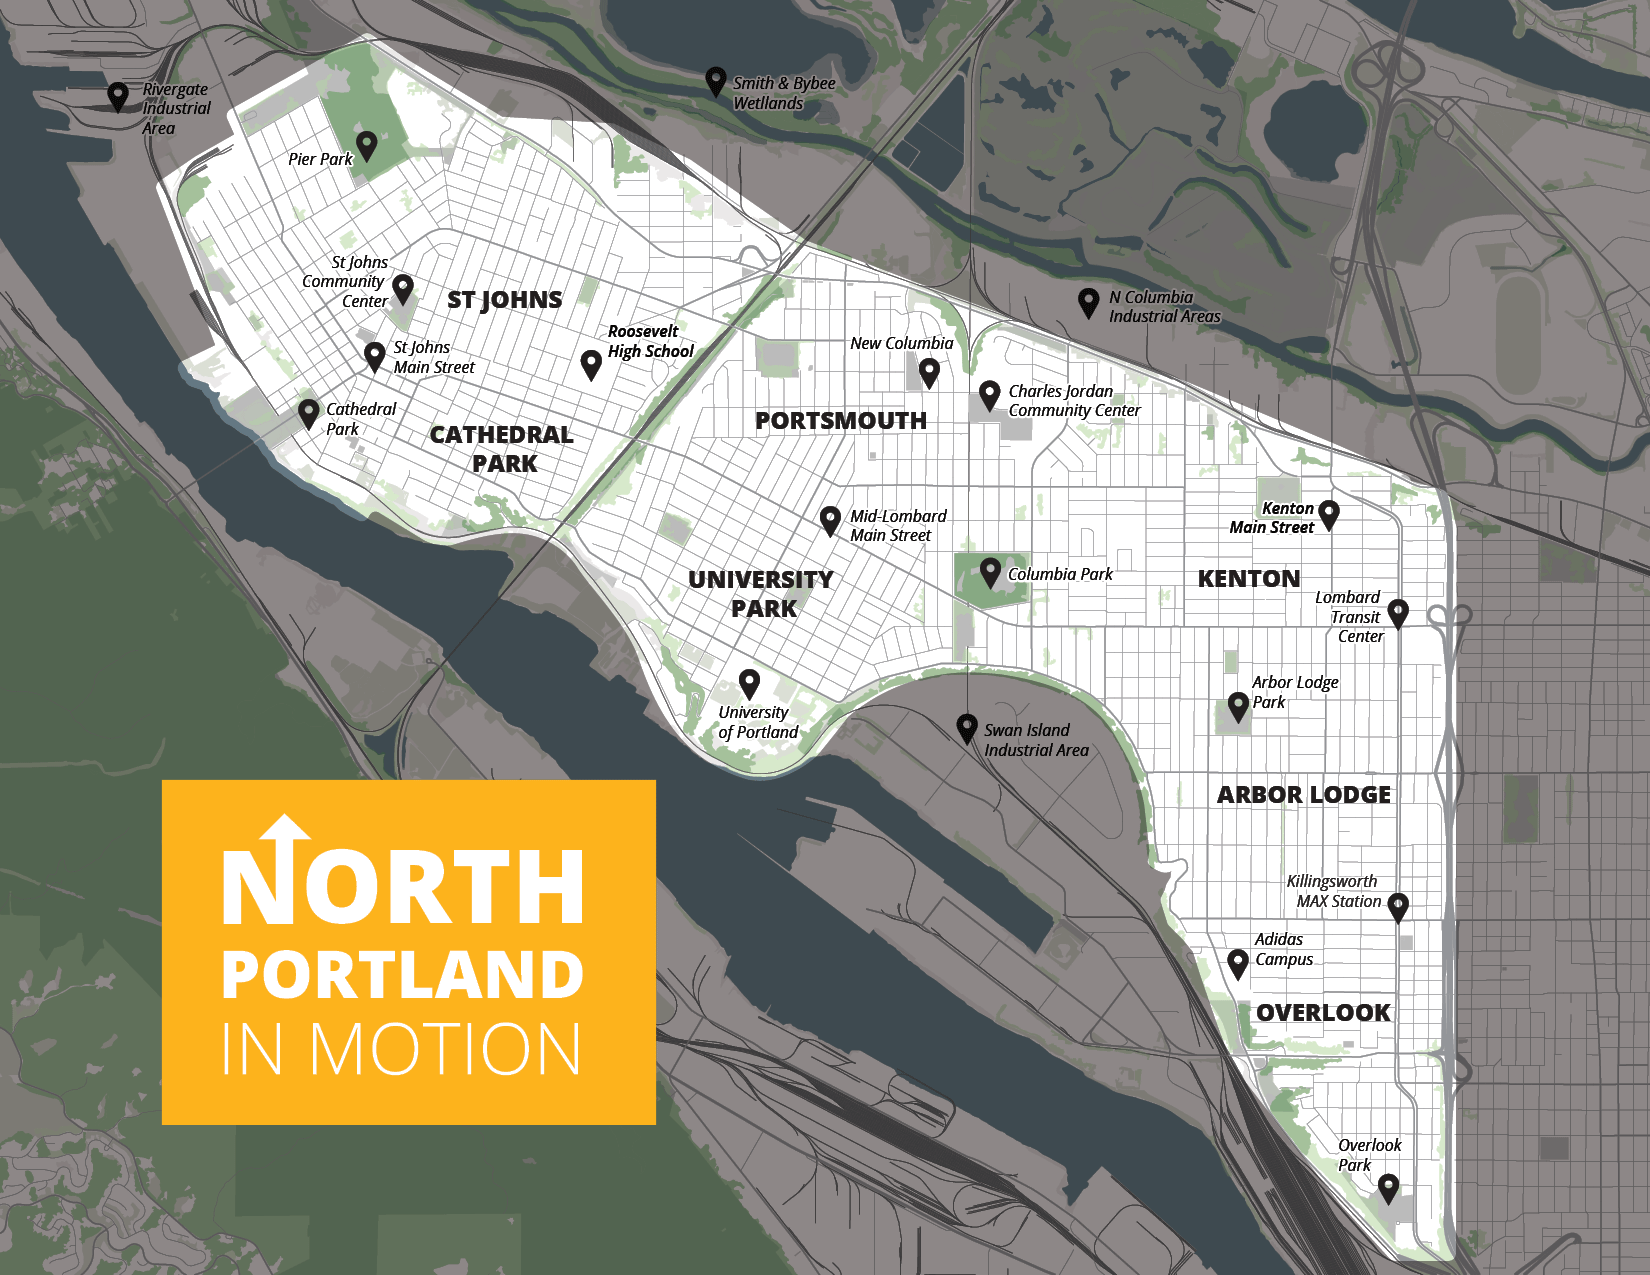 Map of project study area|North Portland in Motion will focus on the residential and commercial areas of North Portland west of Interstate 5.